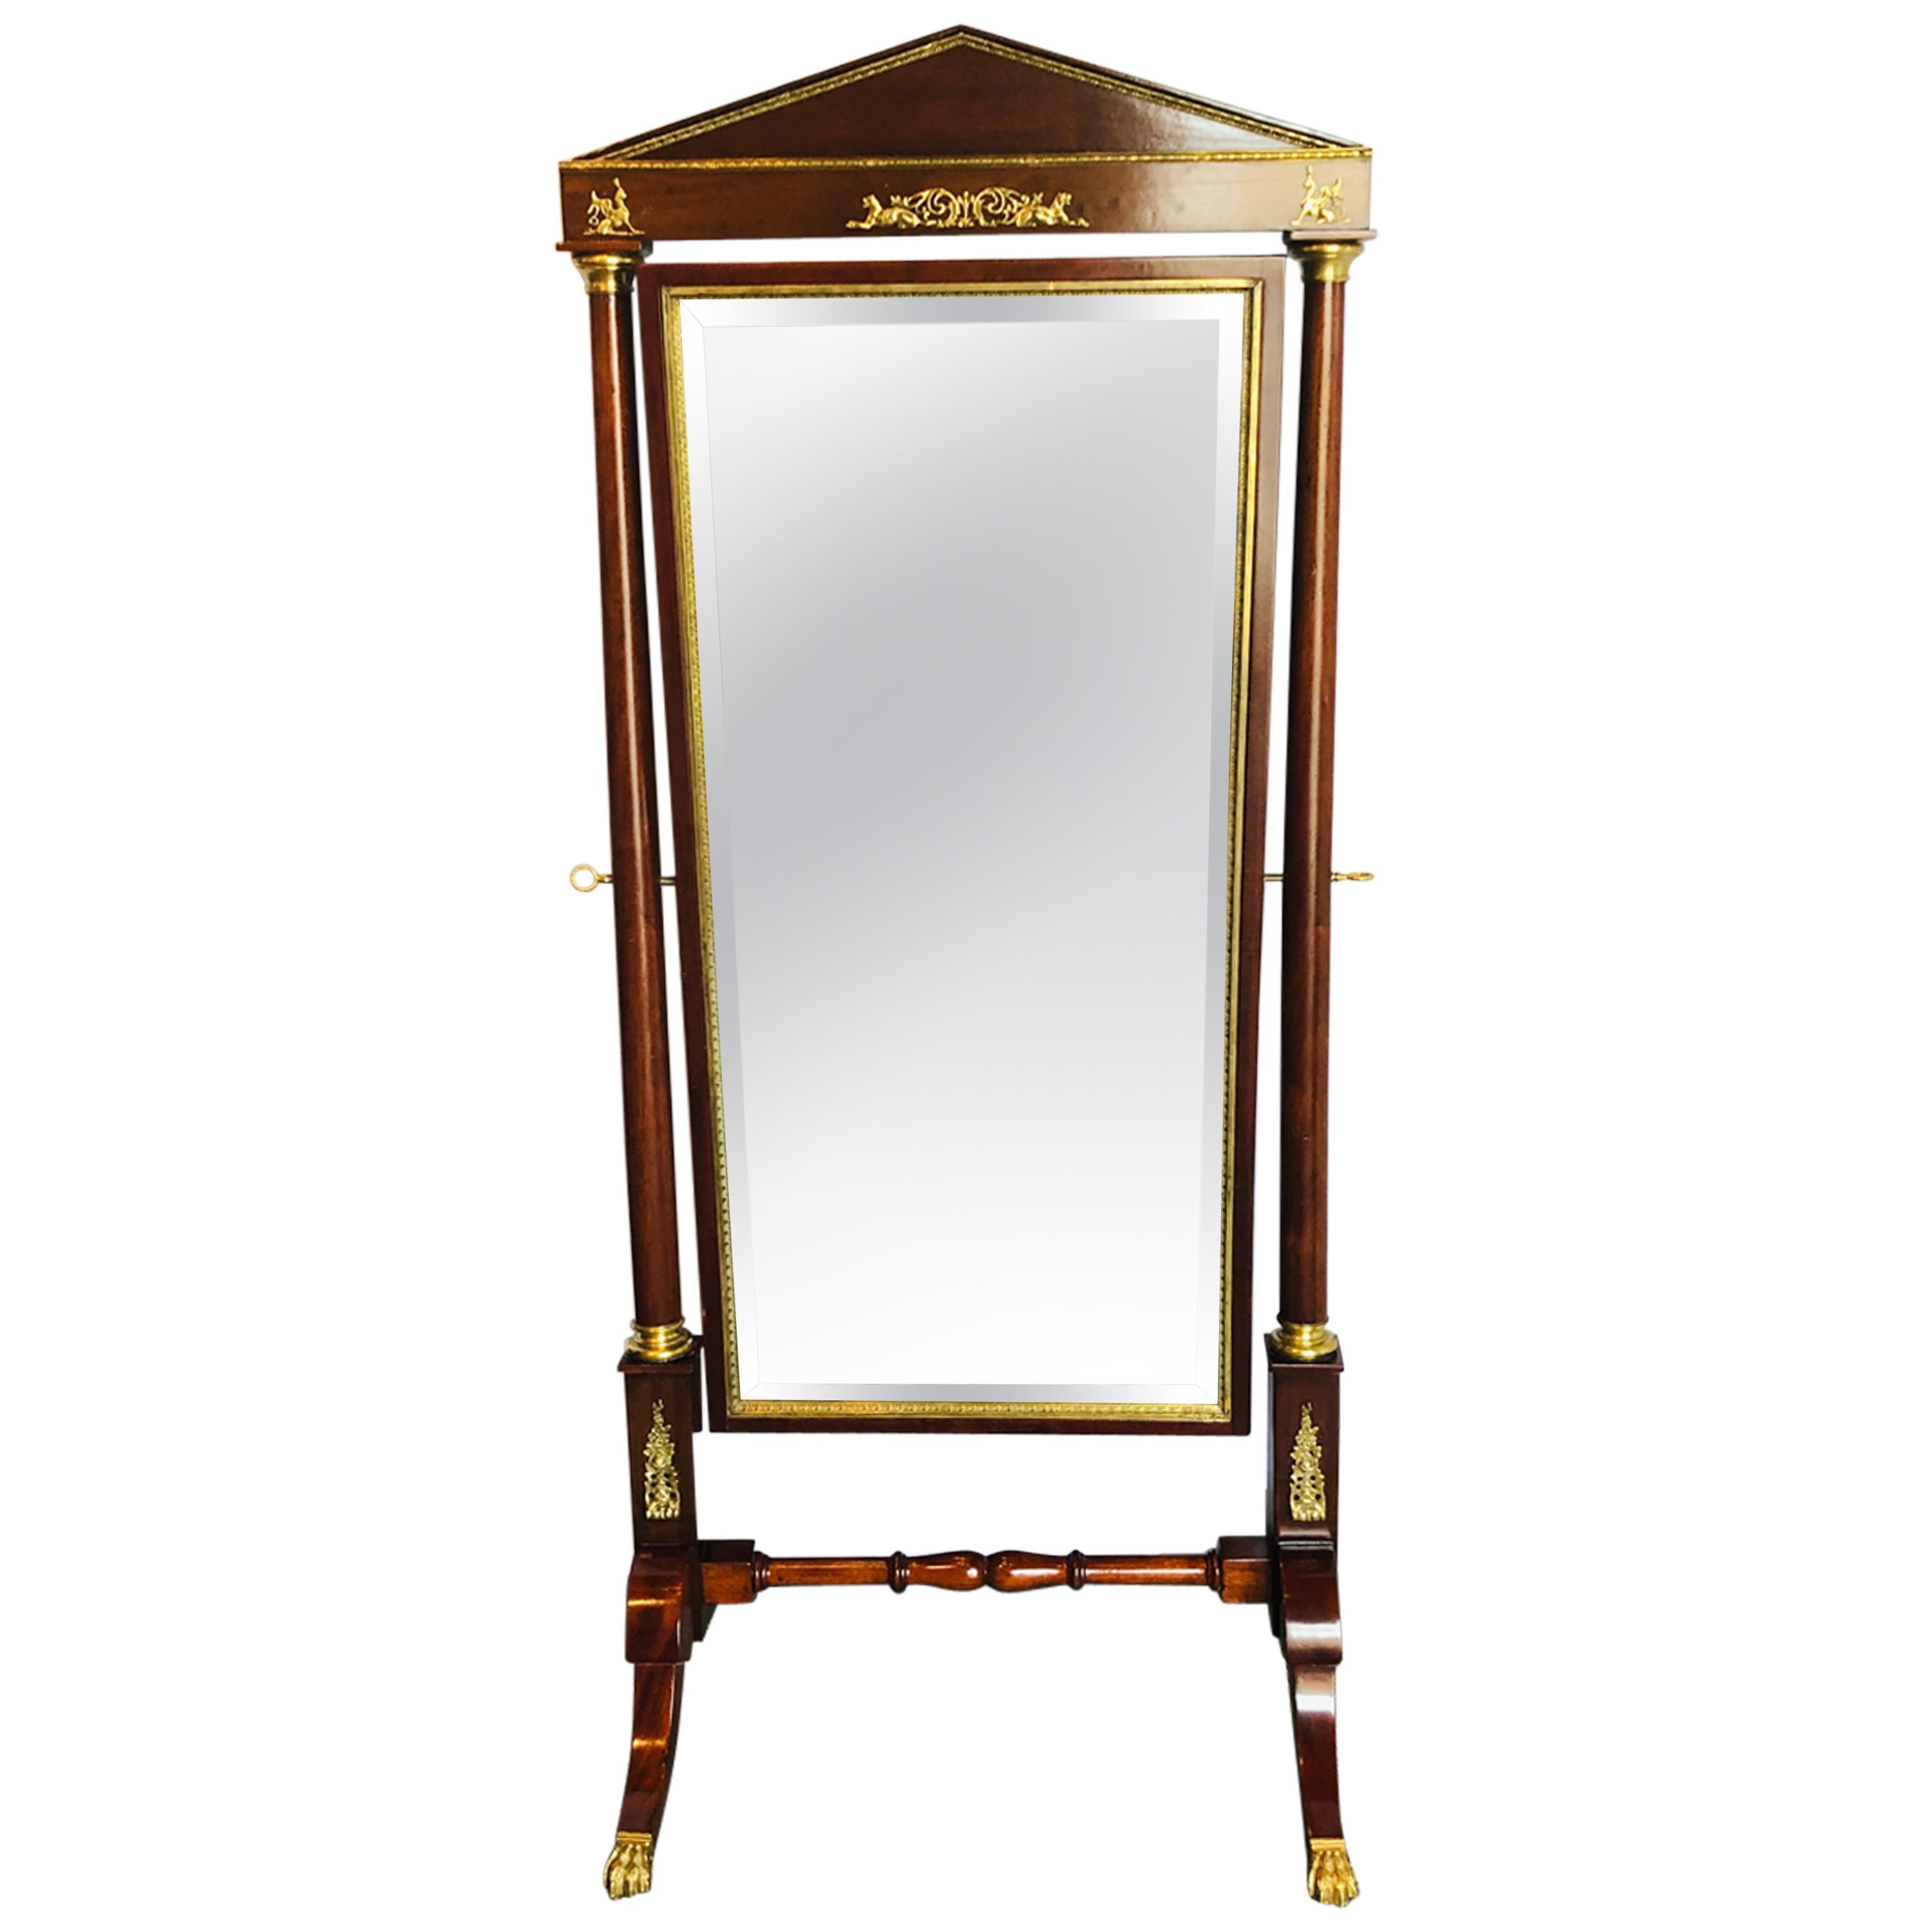 Empire Cheval Floor Full Length Mirror with Bronze Mounts, 19th-20th Century